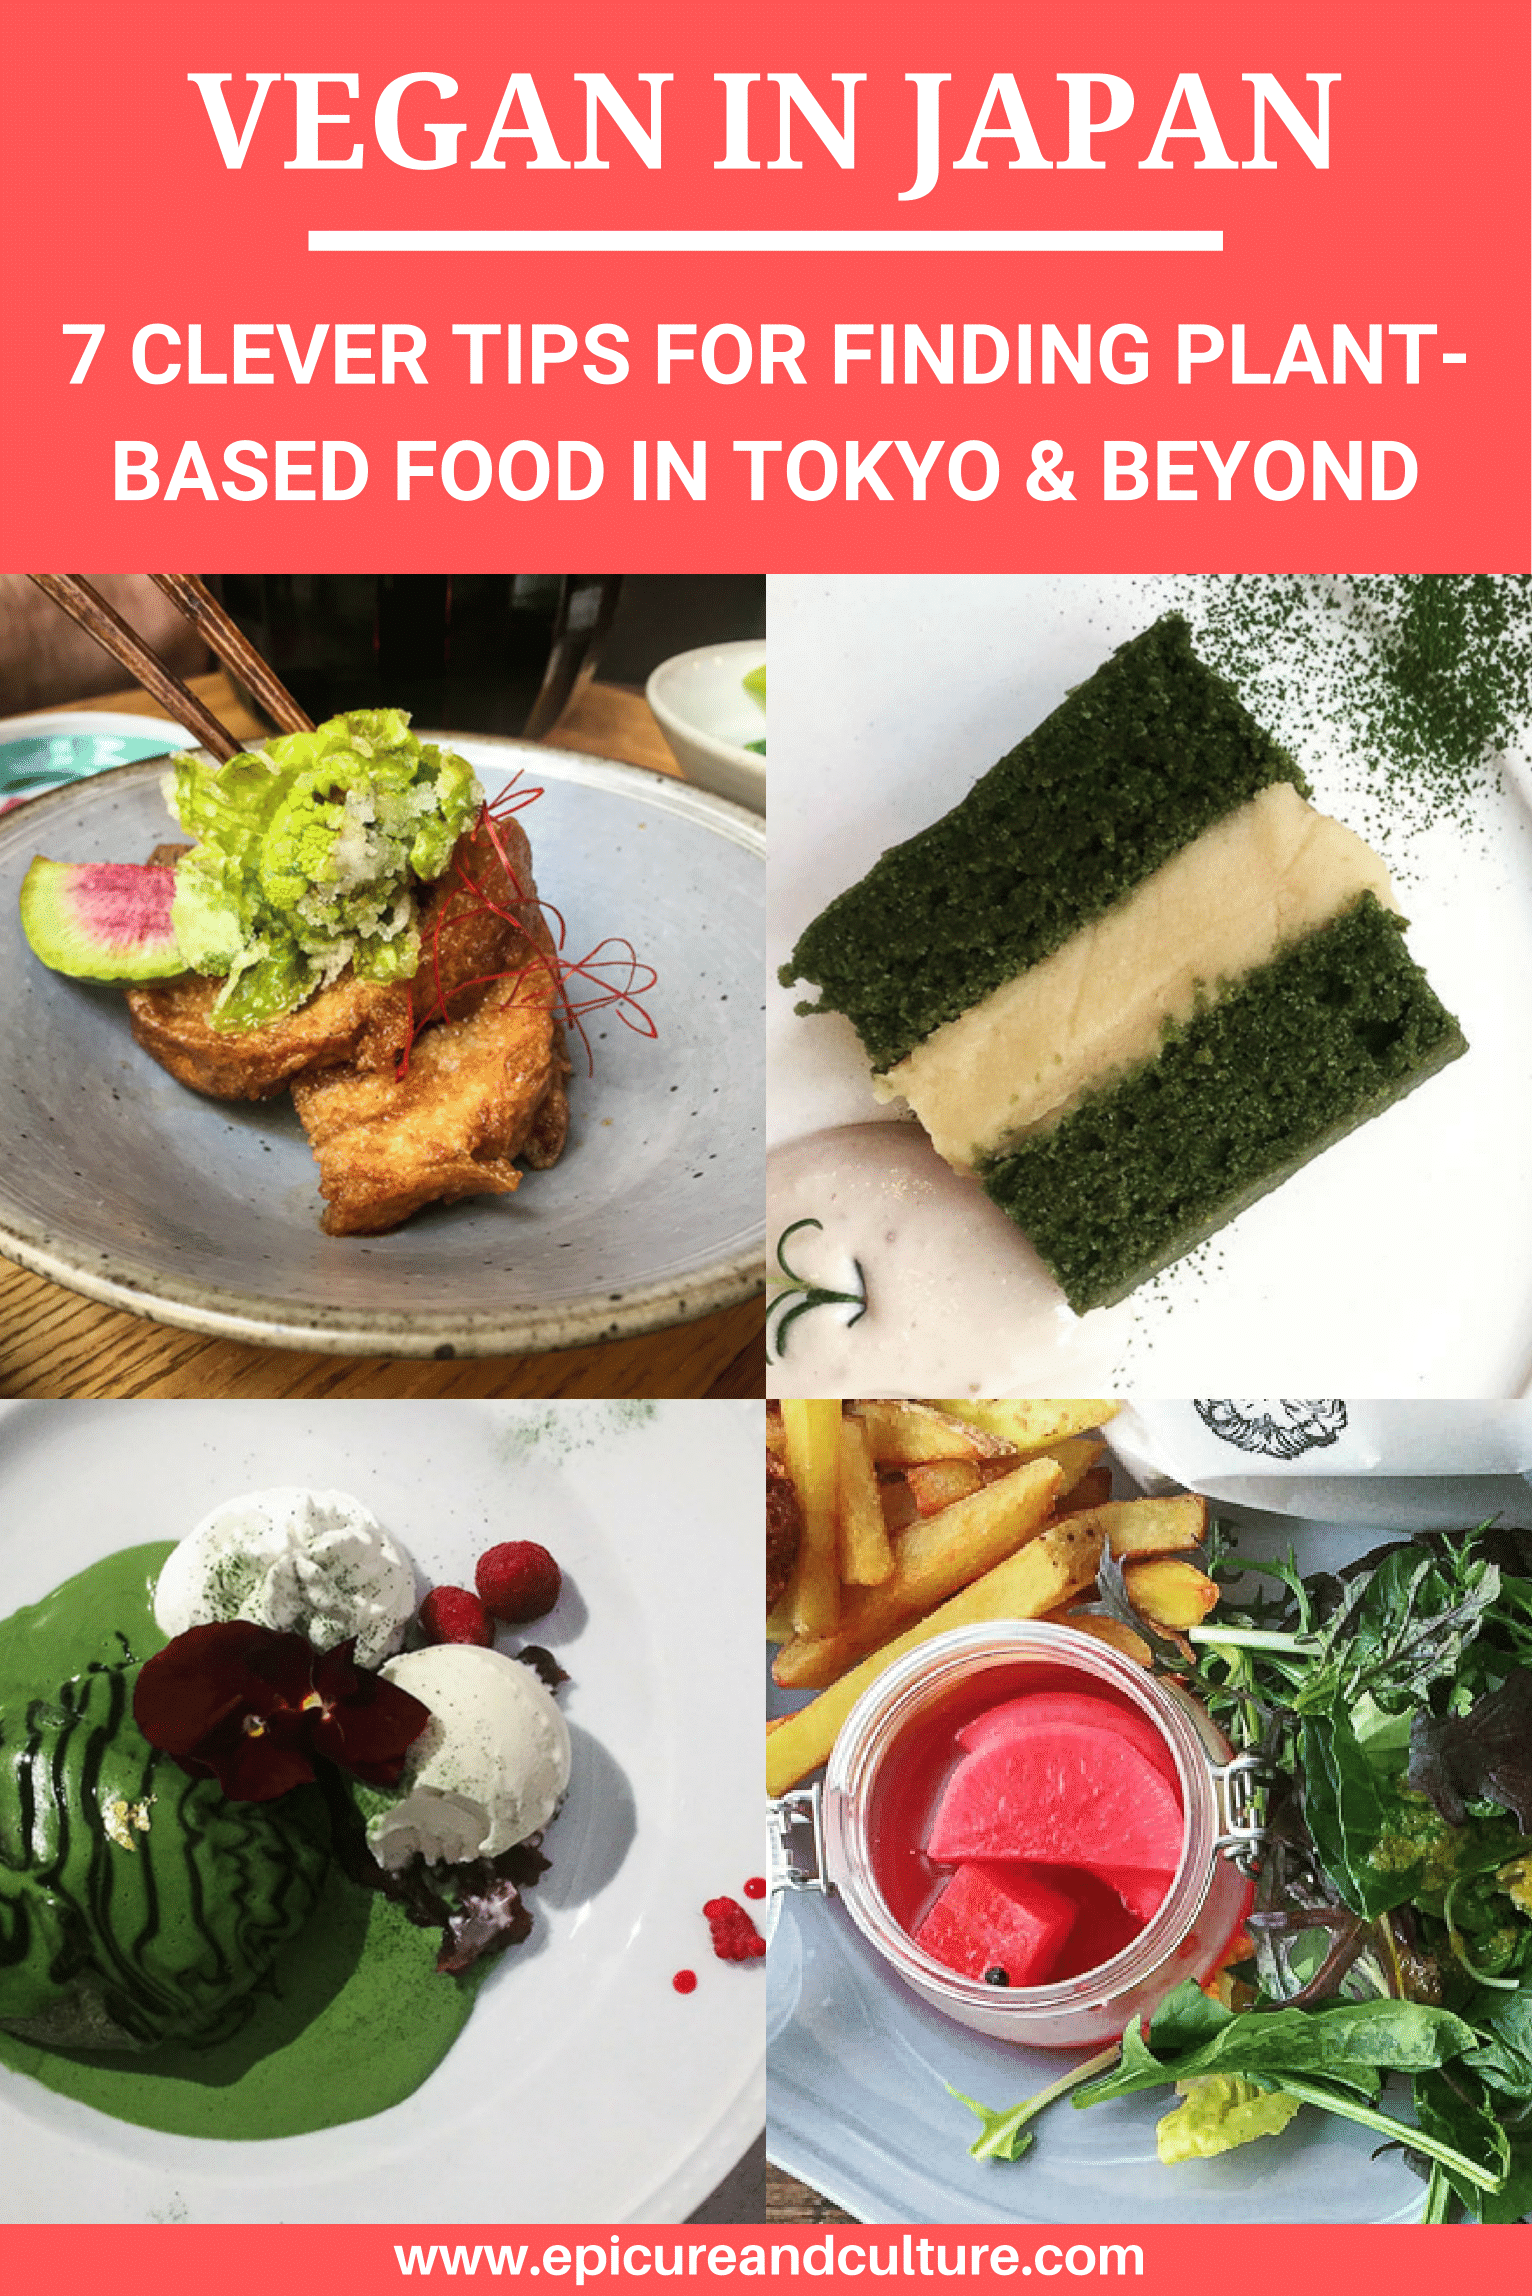 Love vegan sushi and other vegan Japanese food? Check out this guide to traveling to Japan as a vegan, which includes a list of the top vegan restaurants in Tokyo and beyond. You can also find tips for eating out in Japan.